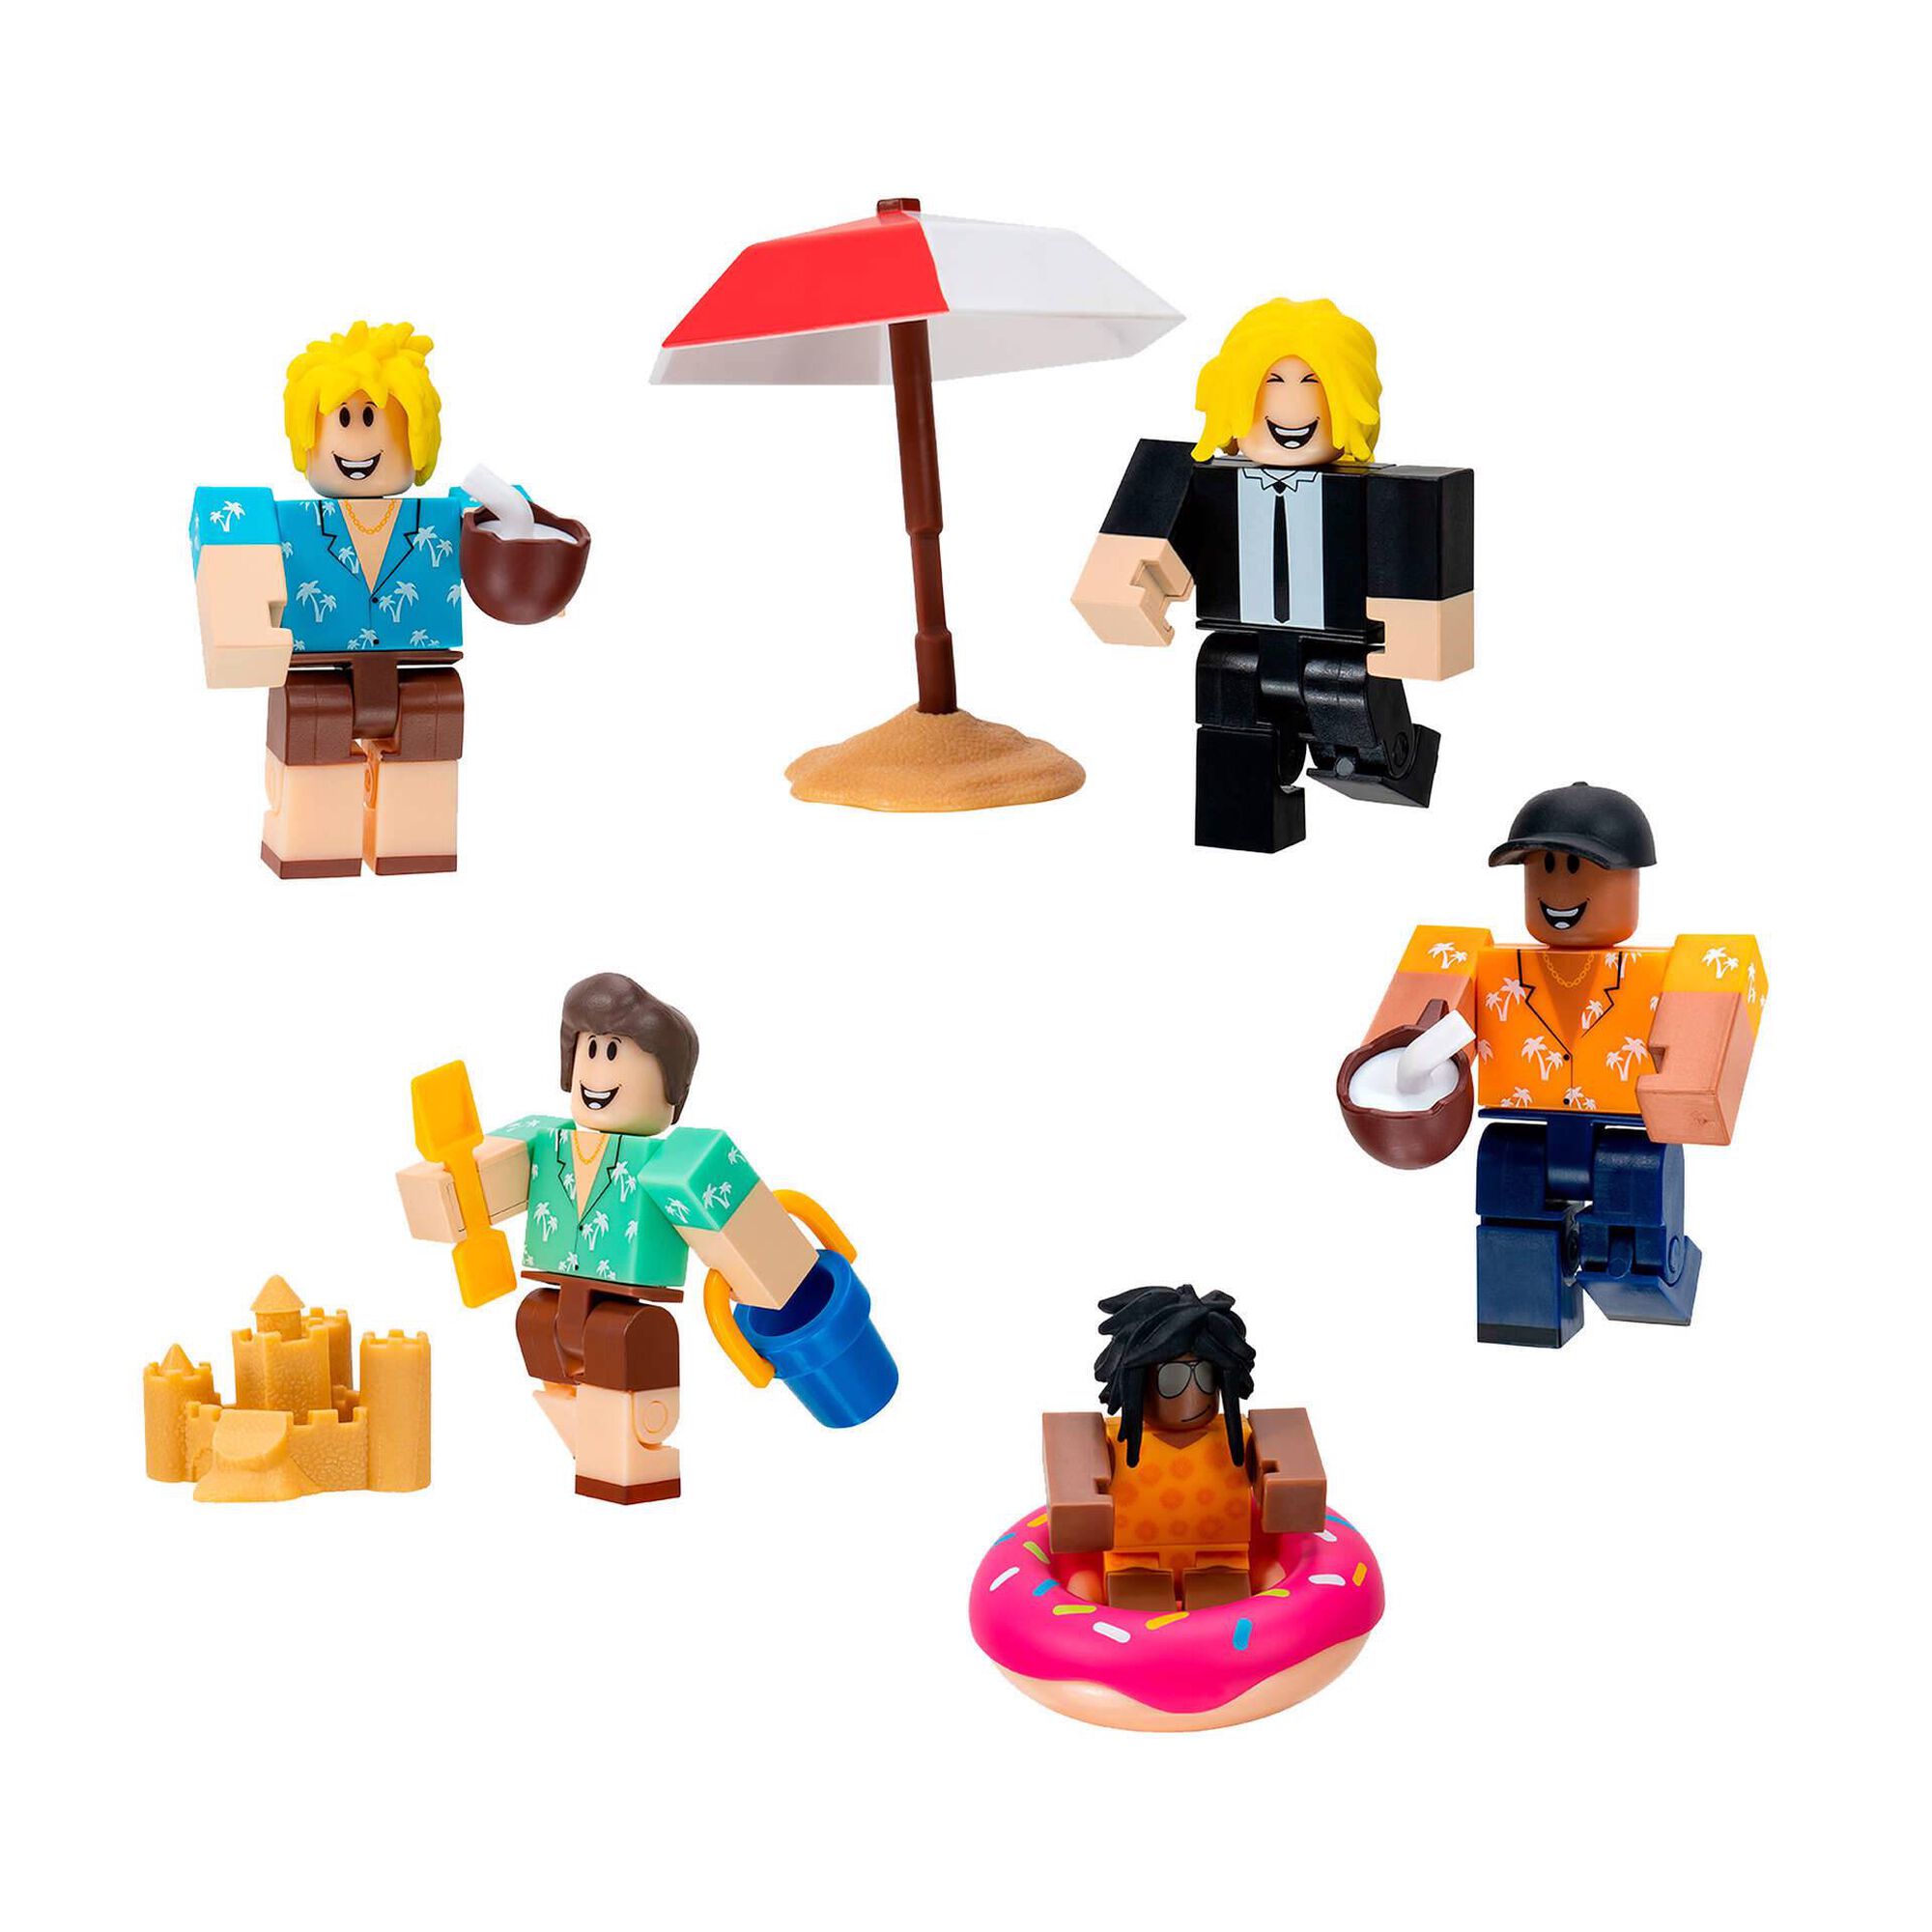 ROBLOX Adopt Me but its LEGO 